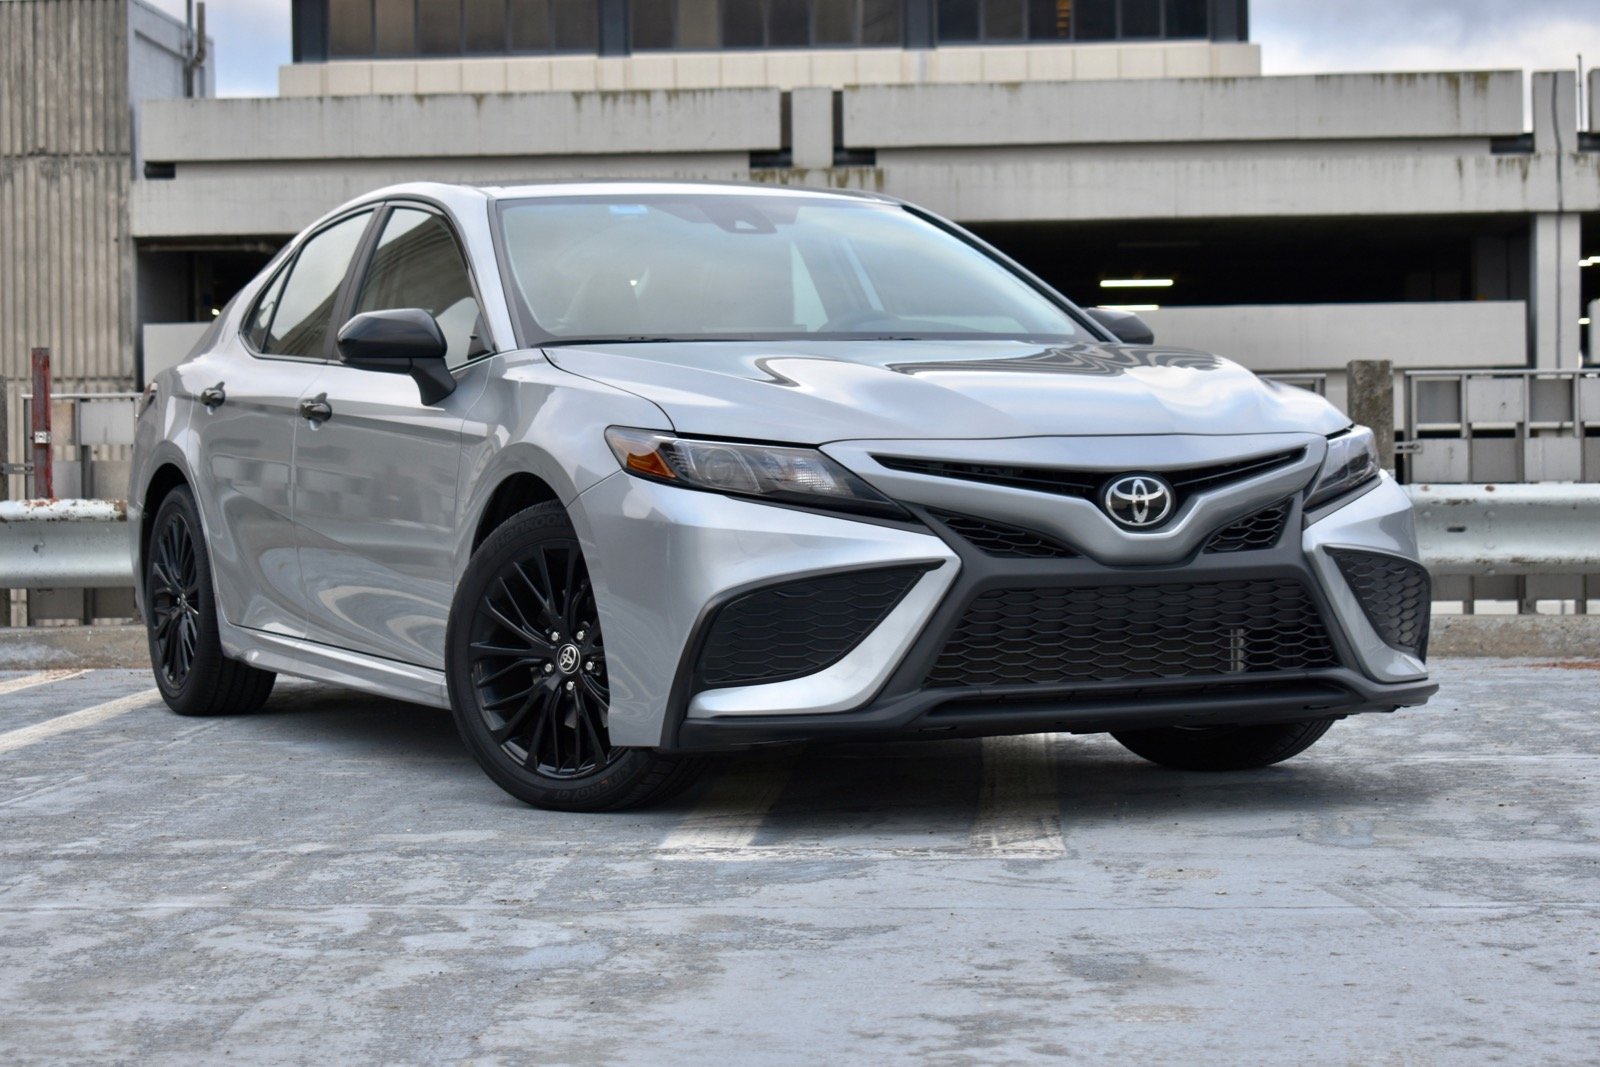 2021 Toyota Camry: Prices, Reviews & Pictures - CarGurus